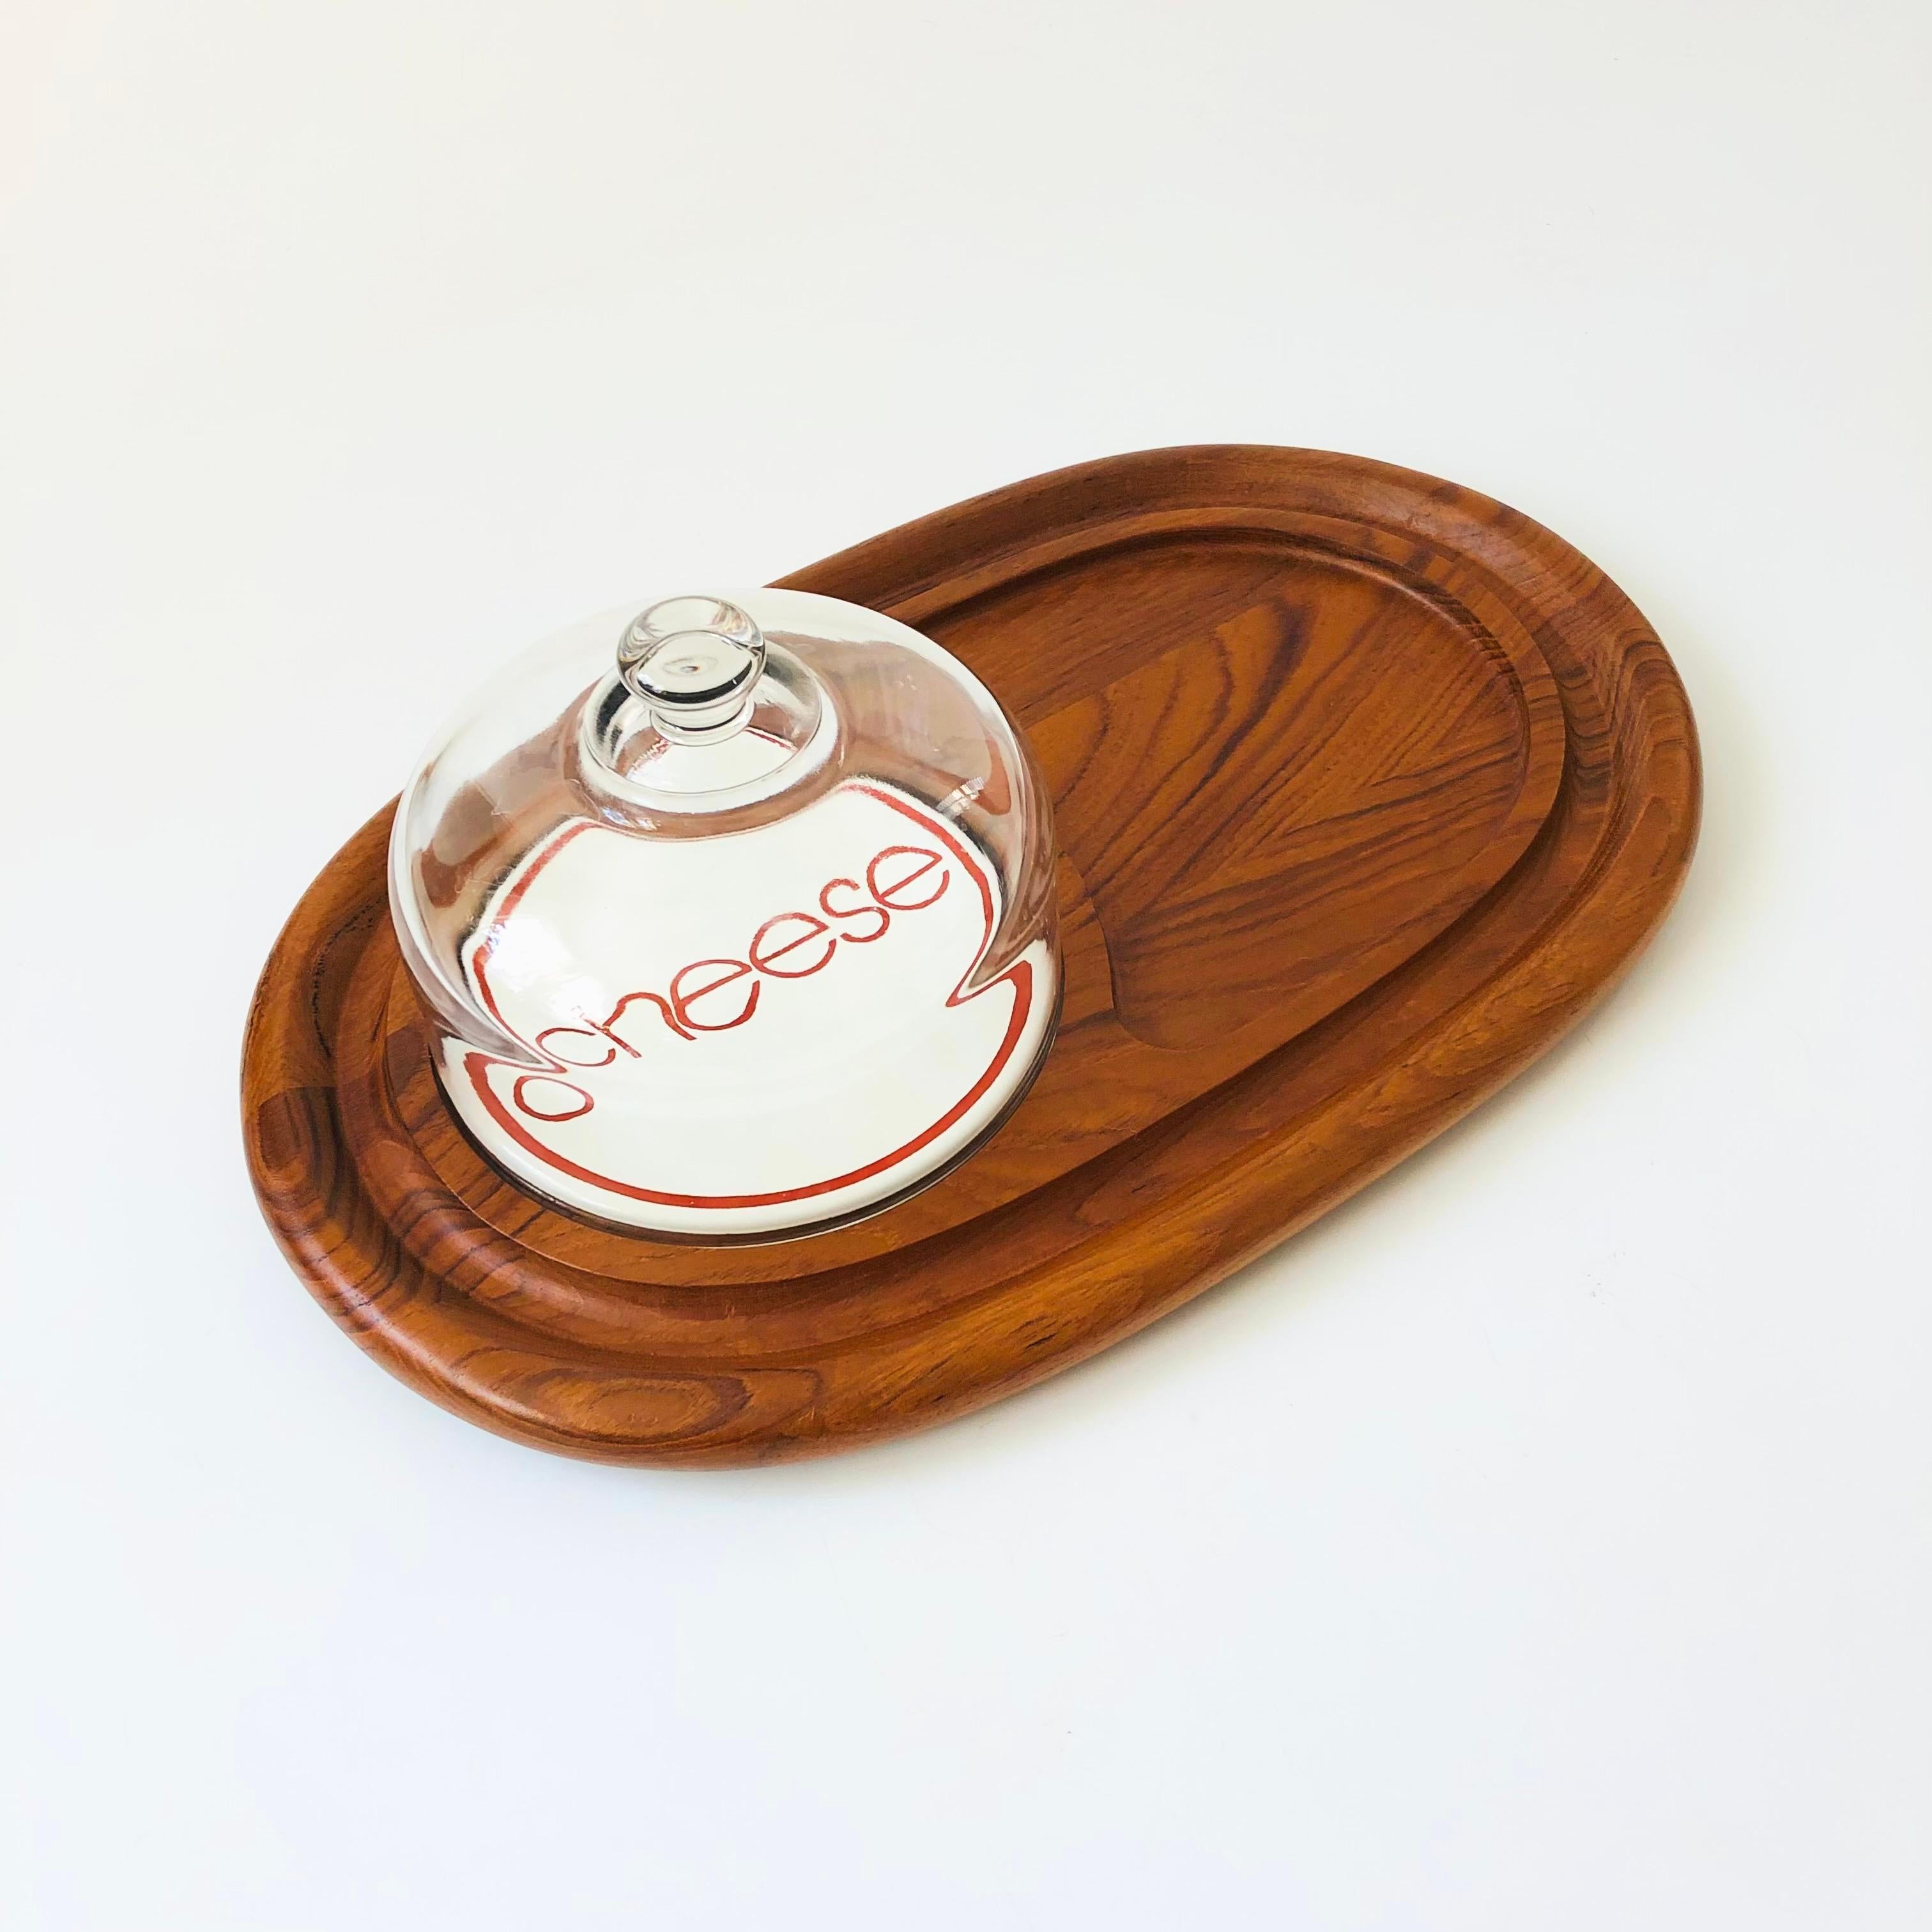 A mid century teak cheese and cracker serving tray. Nice long oval shape. Features a glass cloche on one side over and enameled plate with the words 